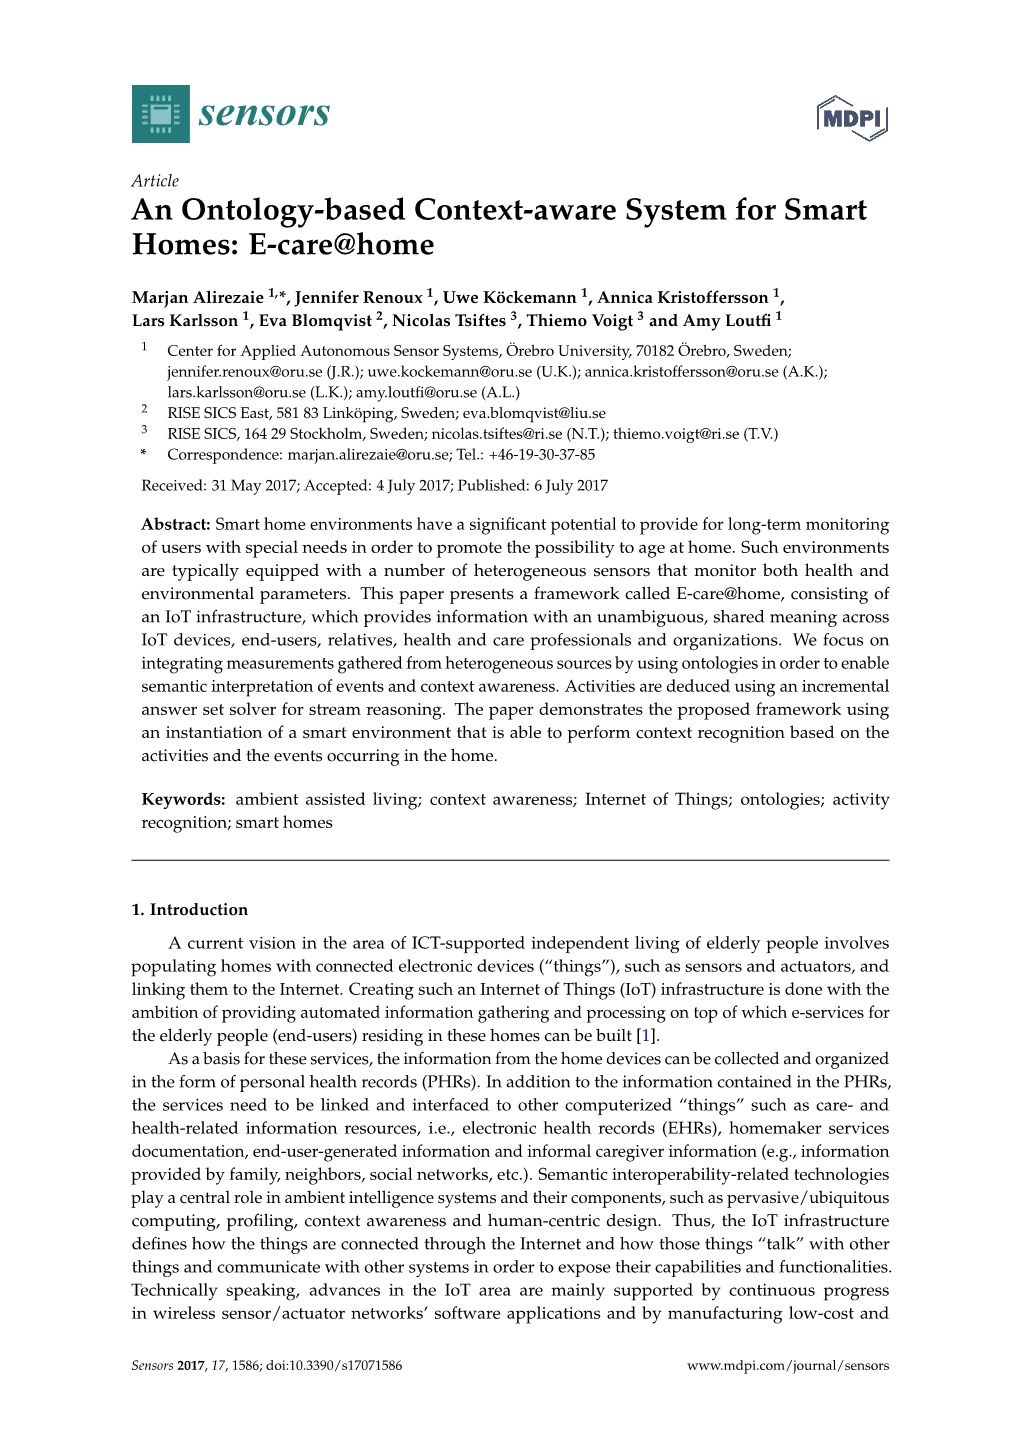 An Ontology-Based Context-Aware System for Smart Homes: E-Care@Home